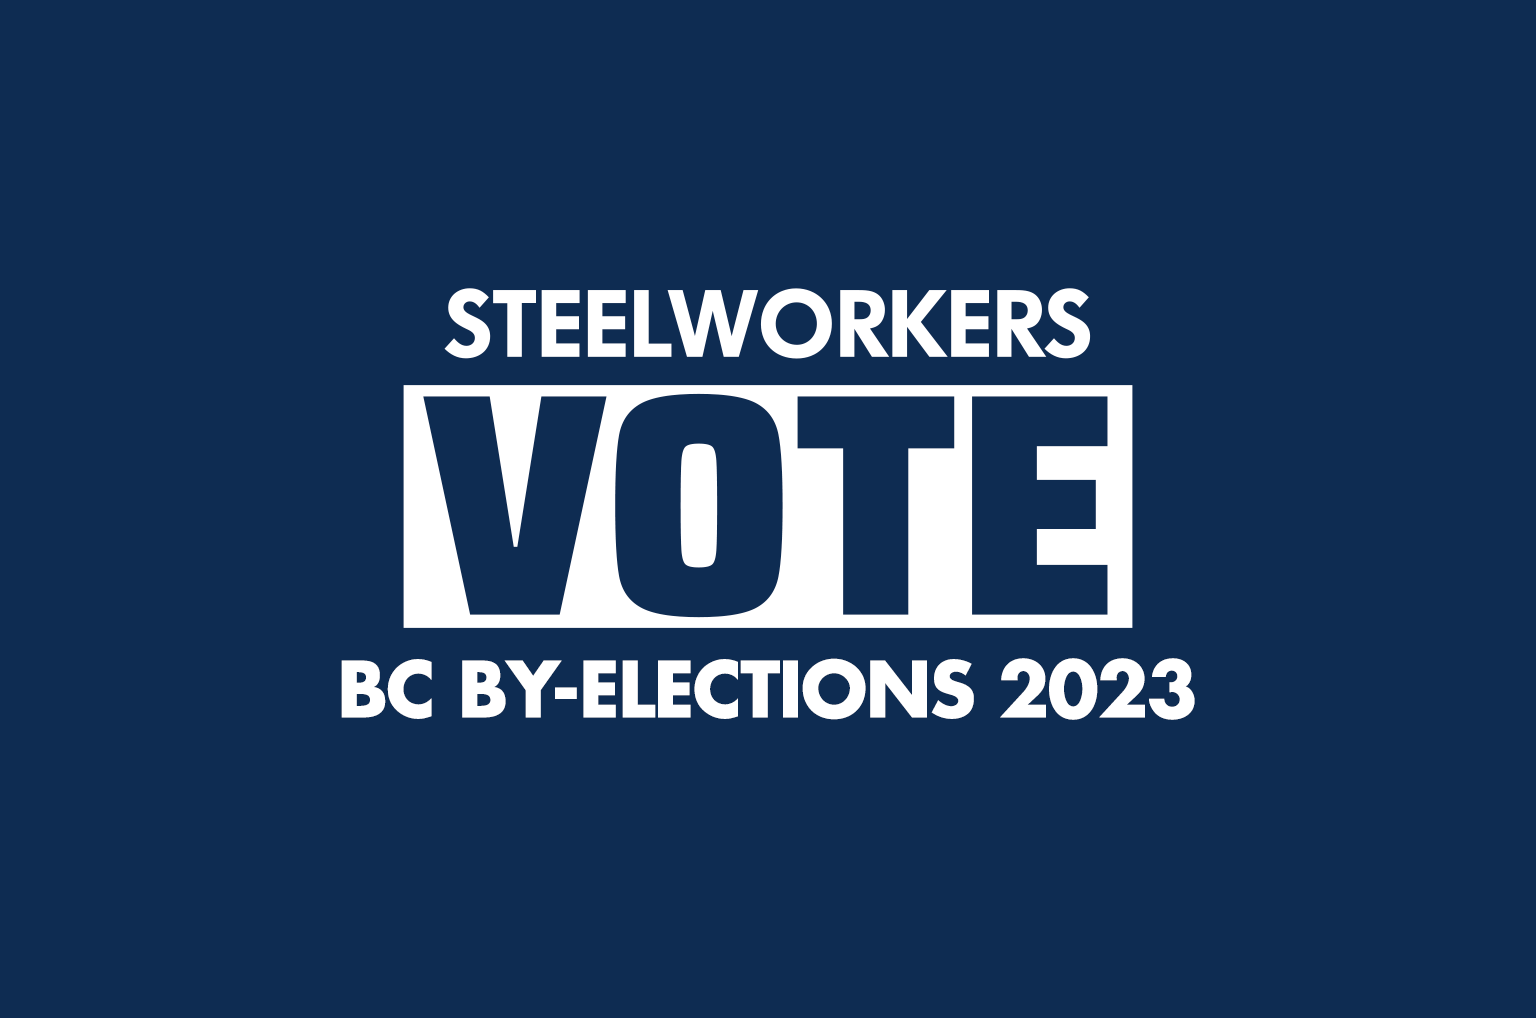 Steelworkers Vote BC By-Elections 2023